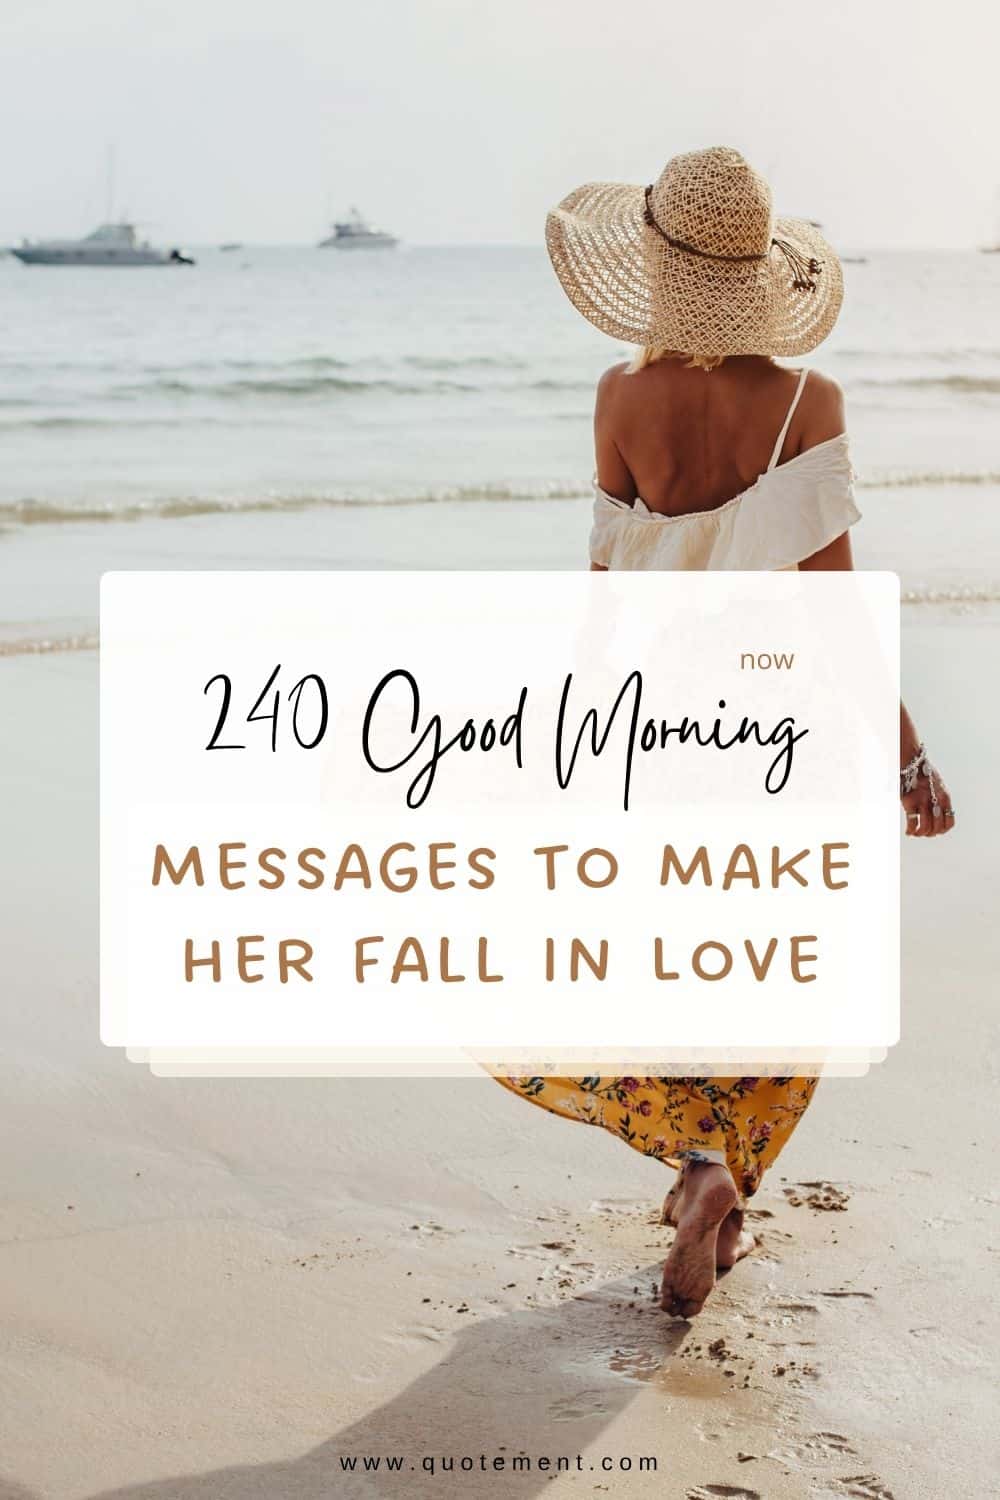 230 Best Good Morning Message To Make Her Fall In Love
